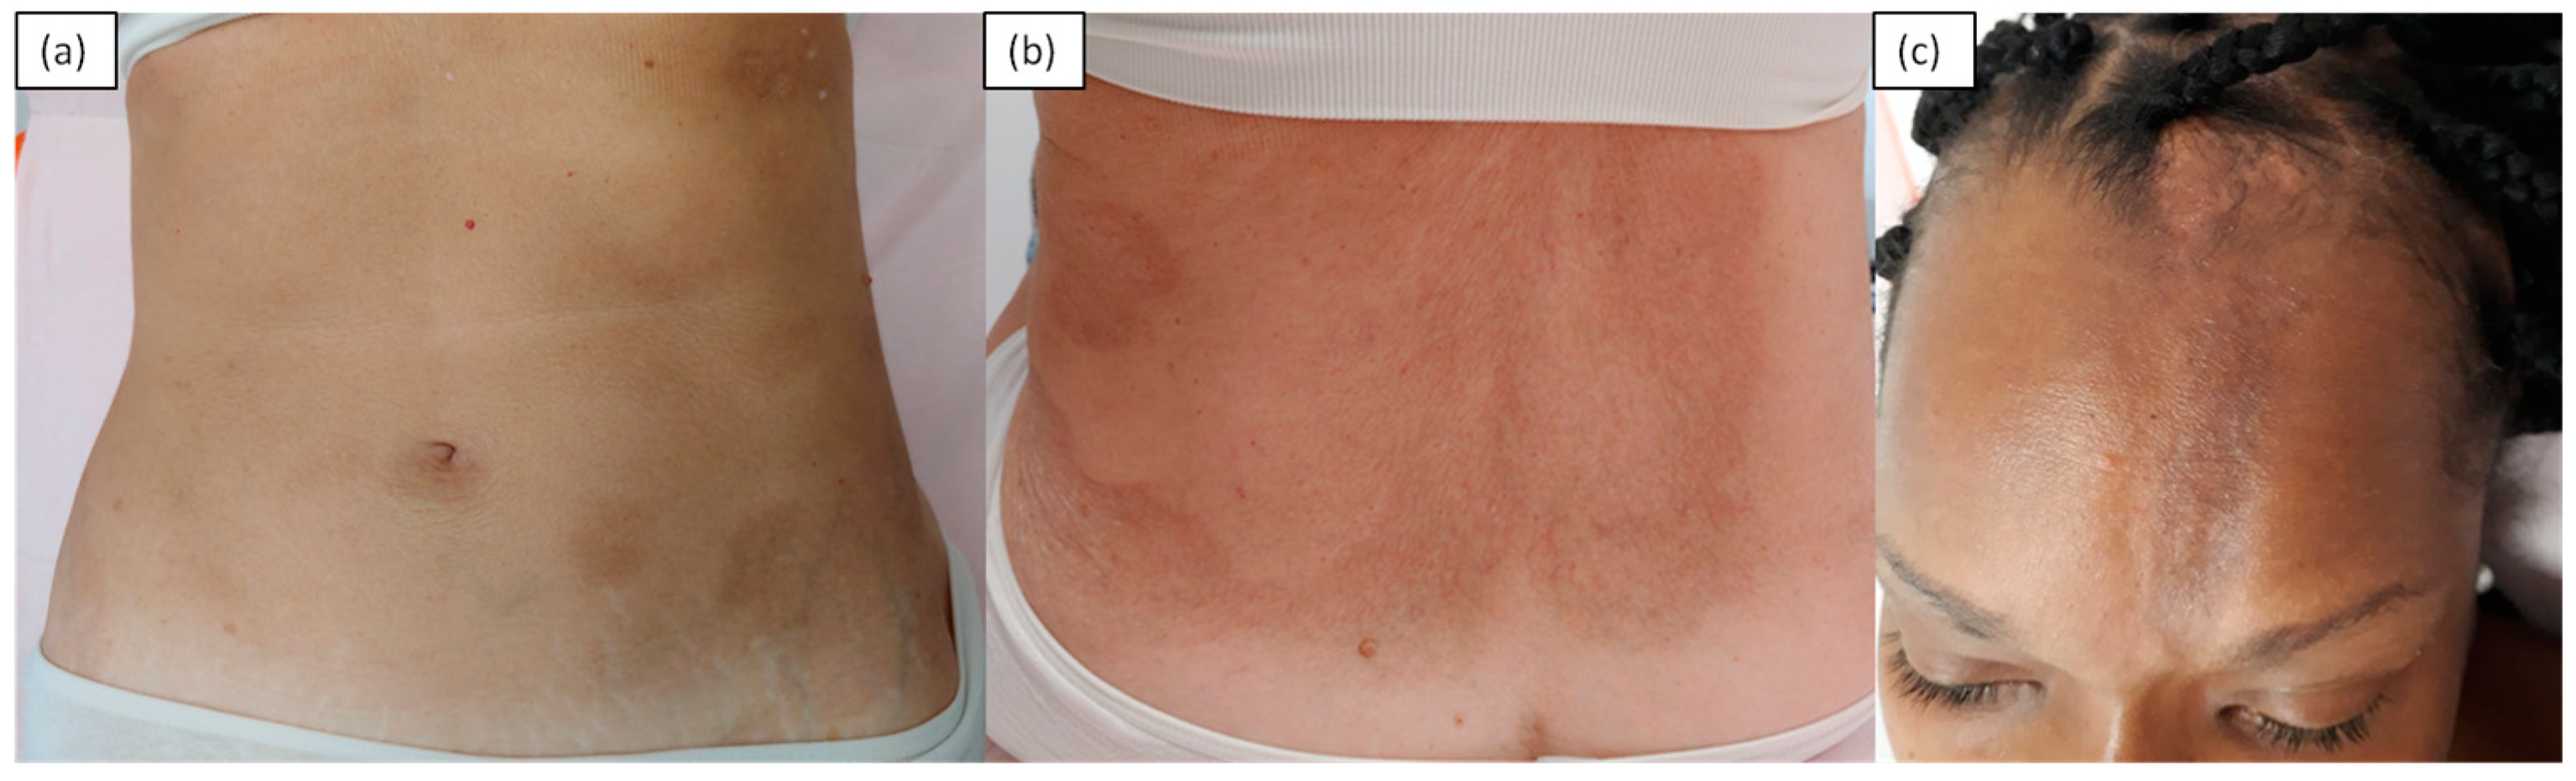 Confluent erythematous papules merging on the lower abdominal region